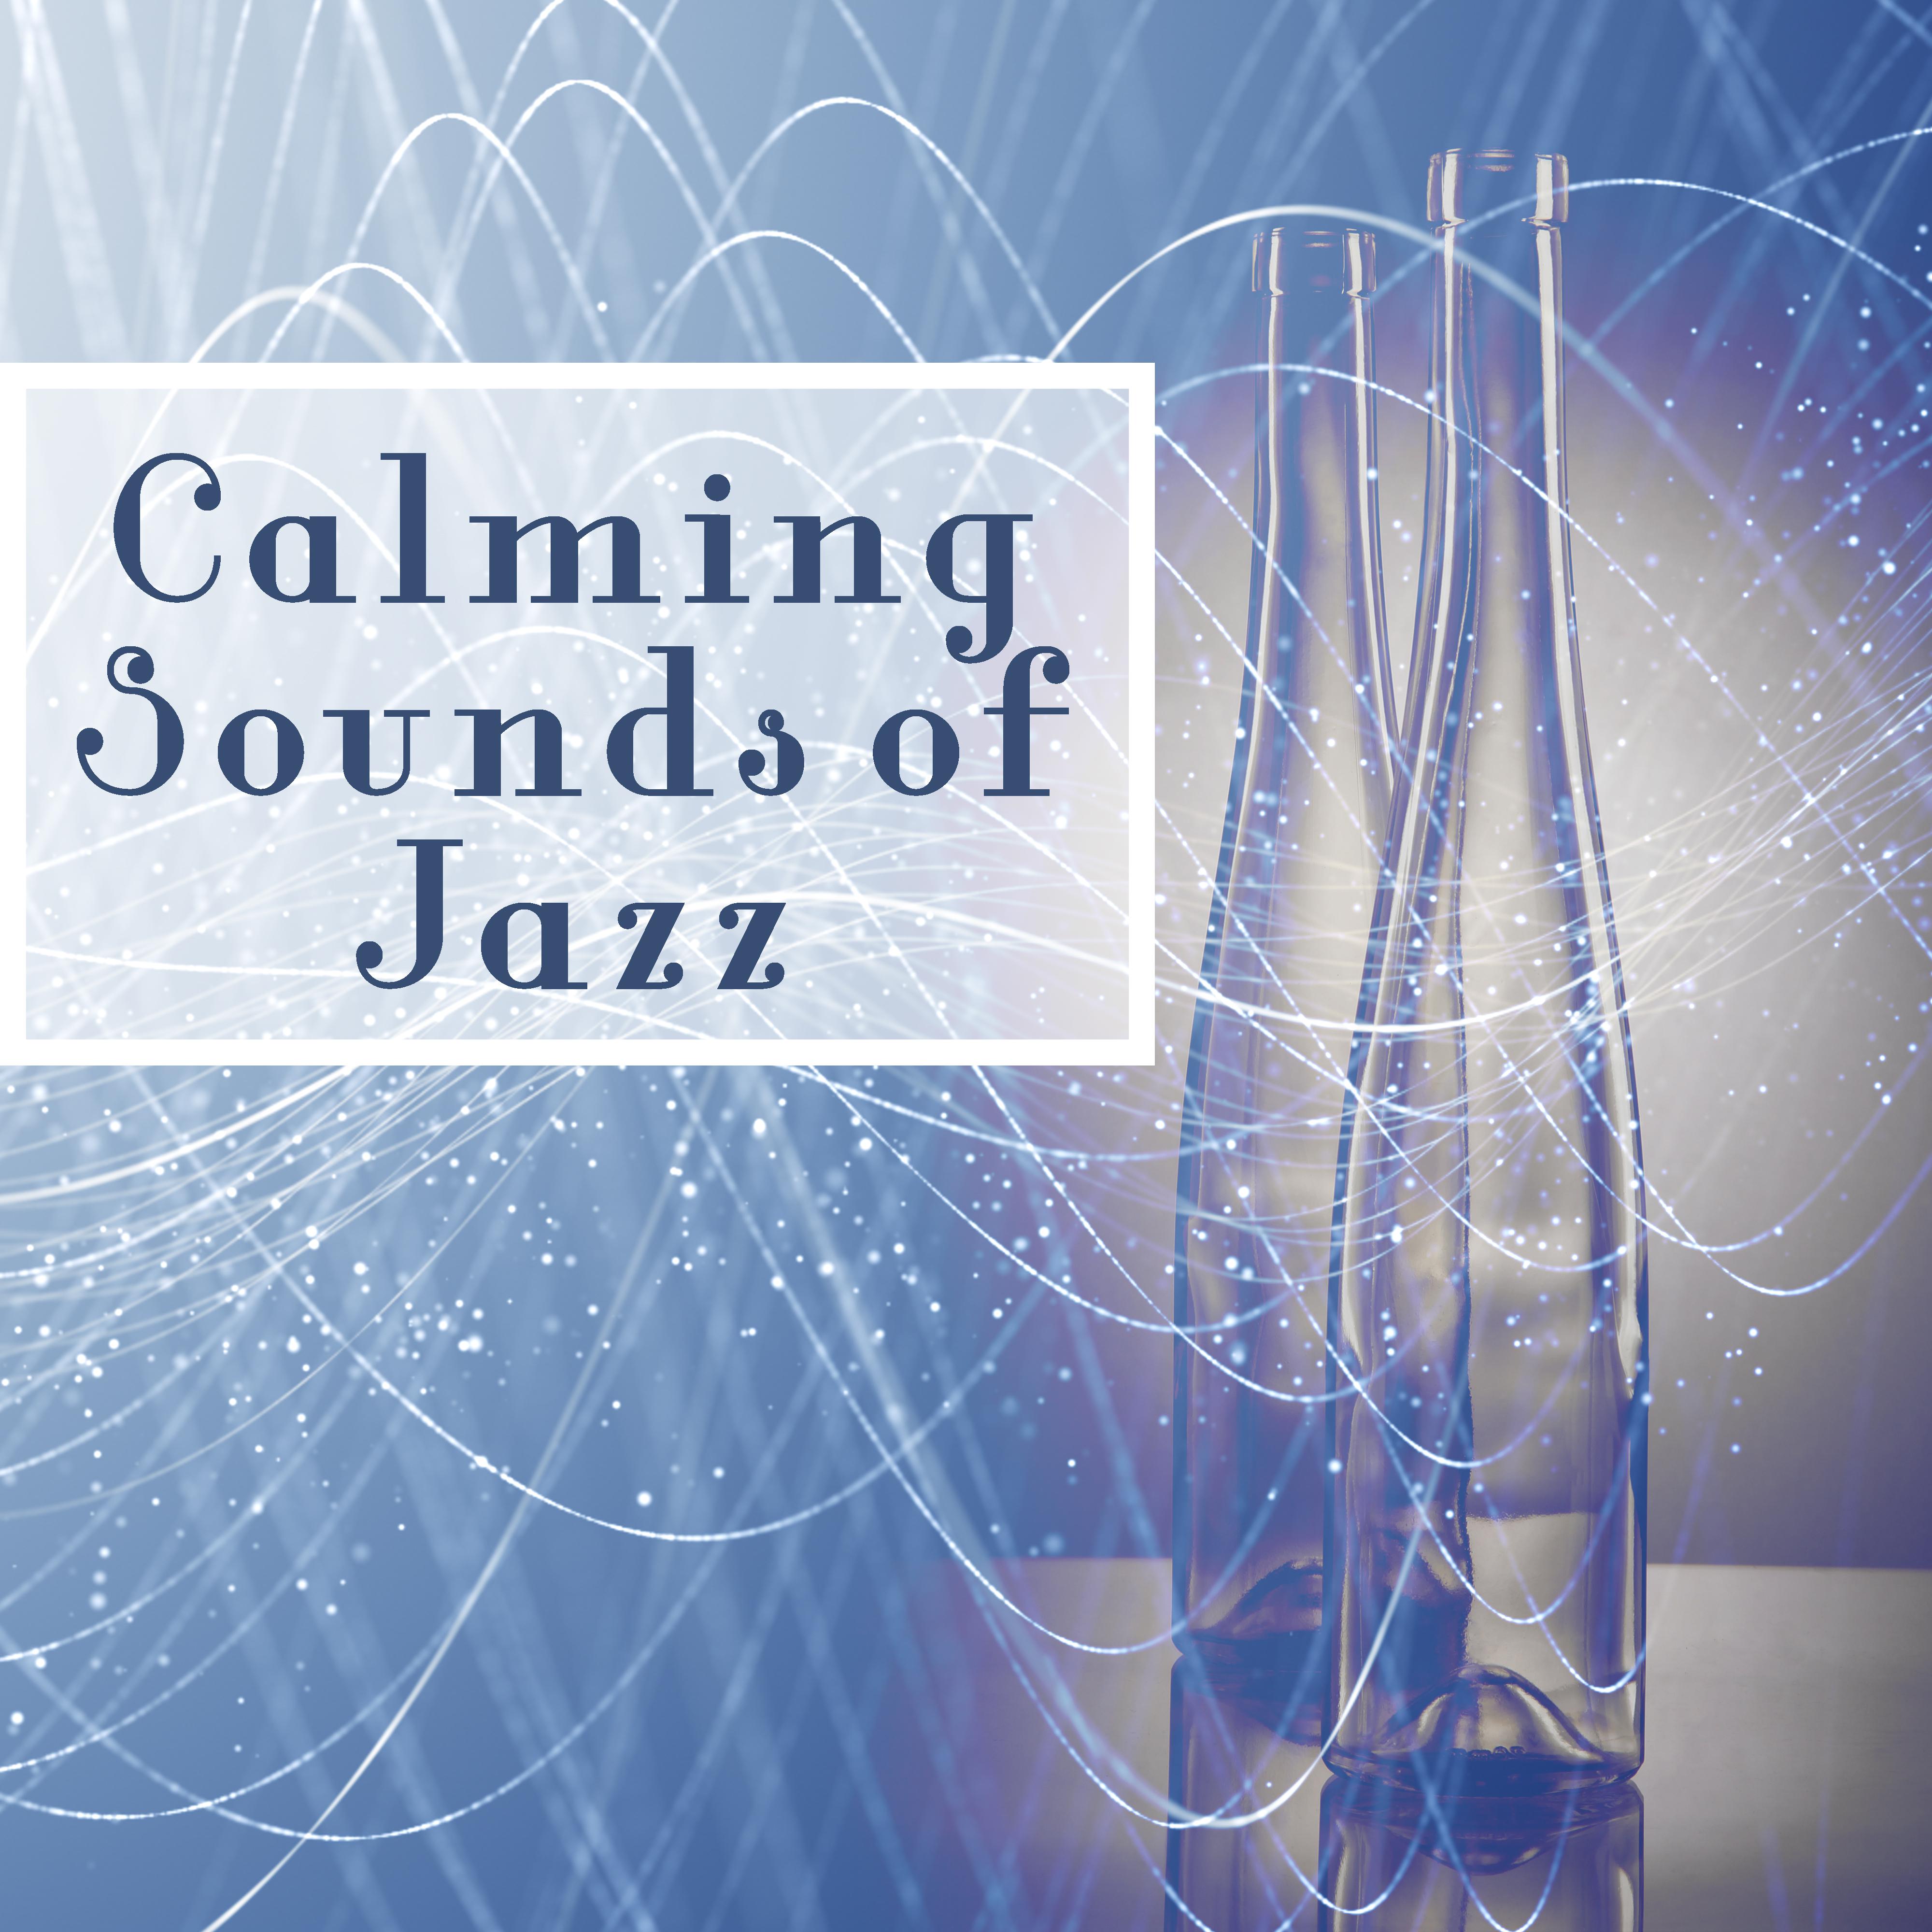 Calming Sounds of Jazz – Soft Sounds to Relax, Peaceful Music to Calm Down, Jazz Melodies